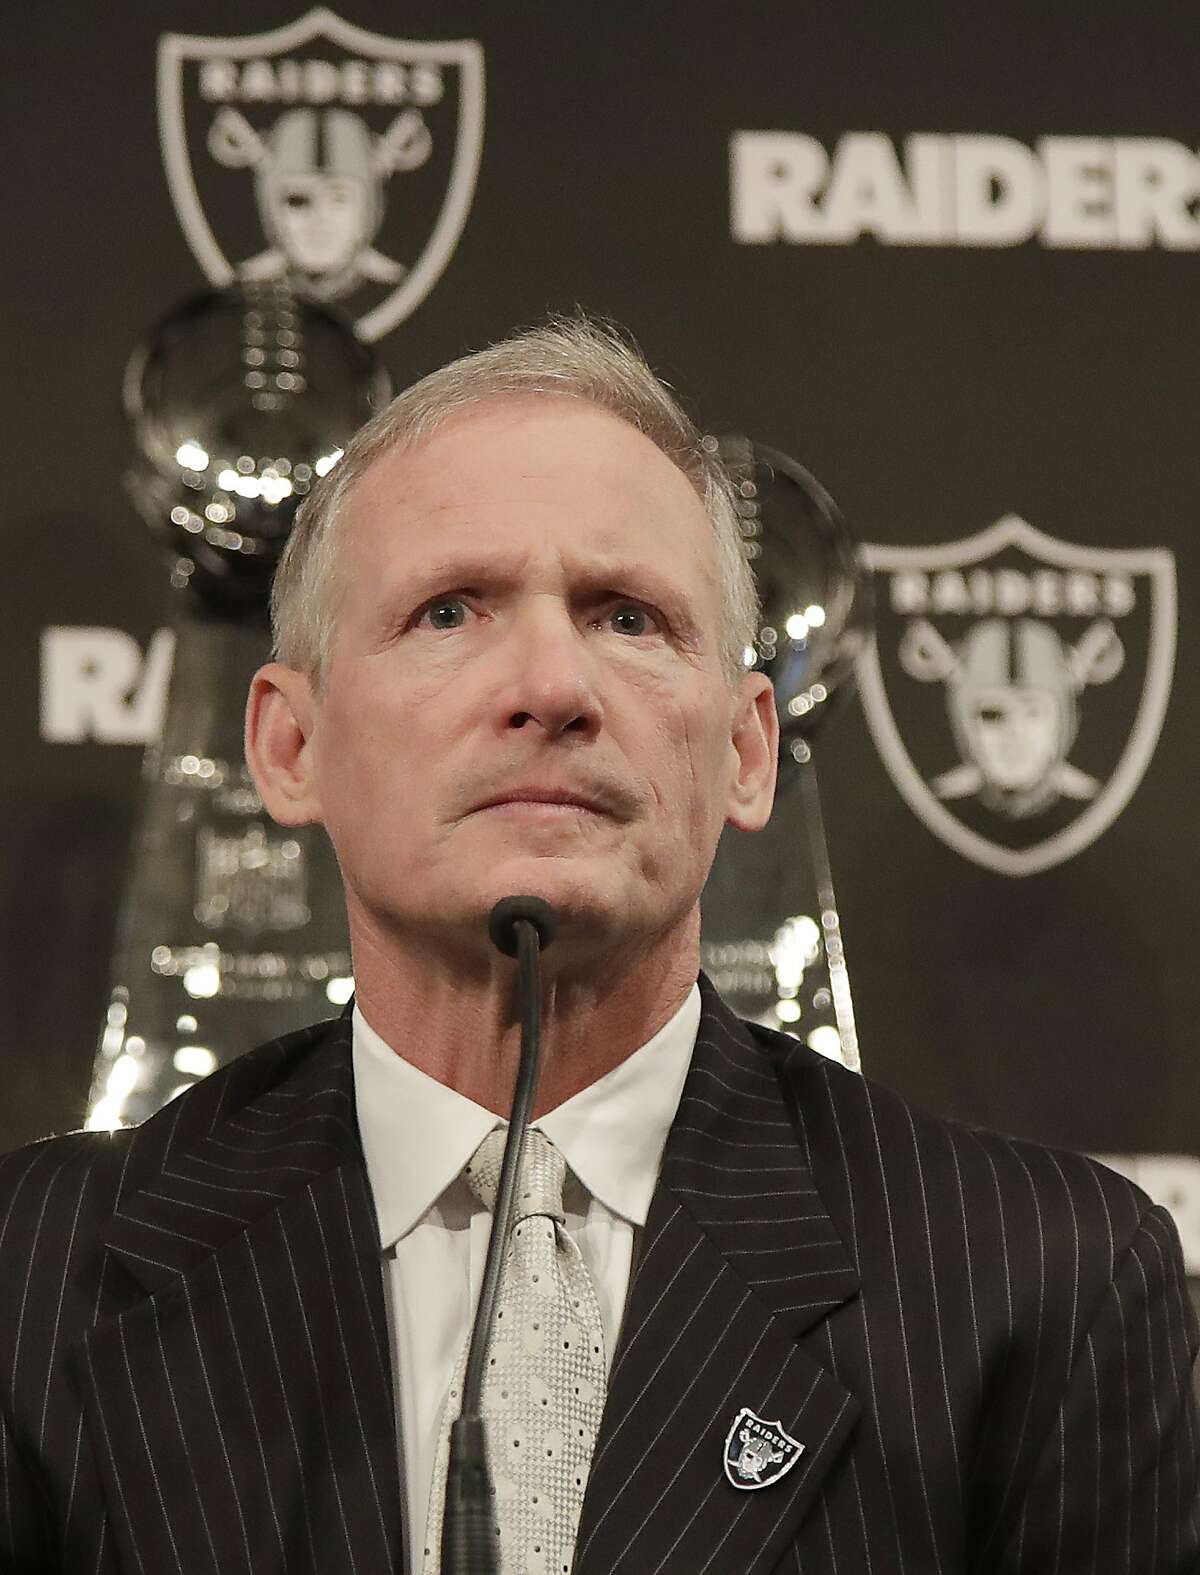 Mike Mayock speaks as at a news conference where he was introduced as the new Oakland Raiders general manager at the team's headquarters in Oakland, Calif., Monday, Dec. 31, 2018. (AP Photo/Jeff Chiu)